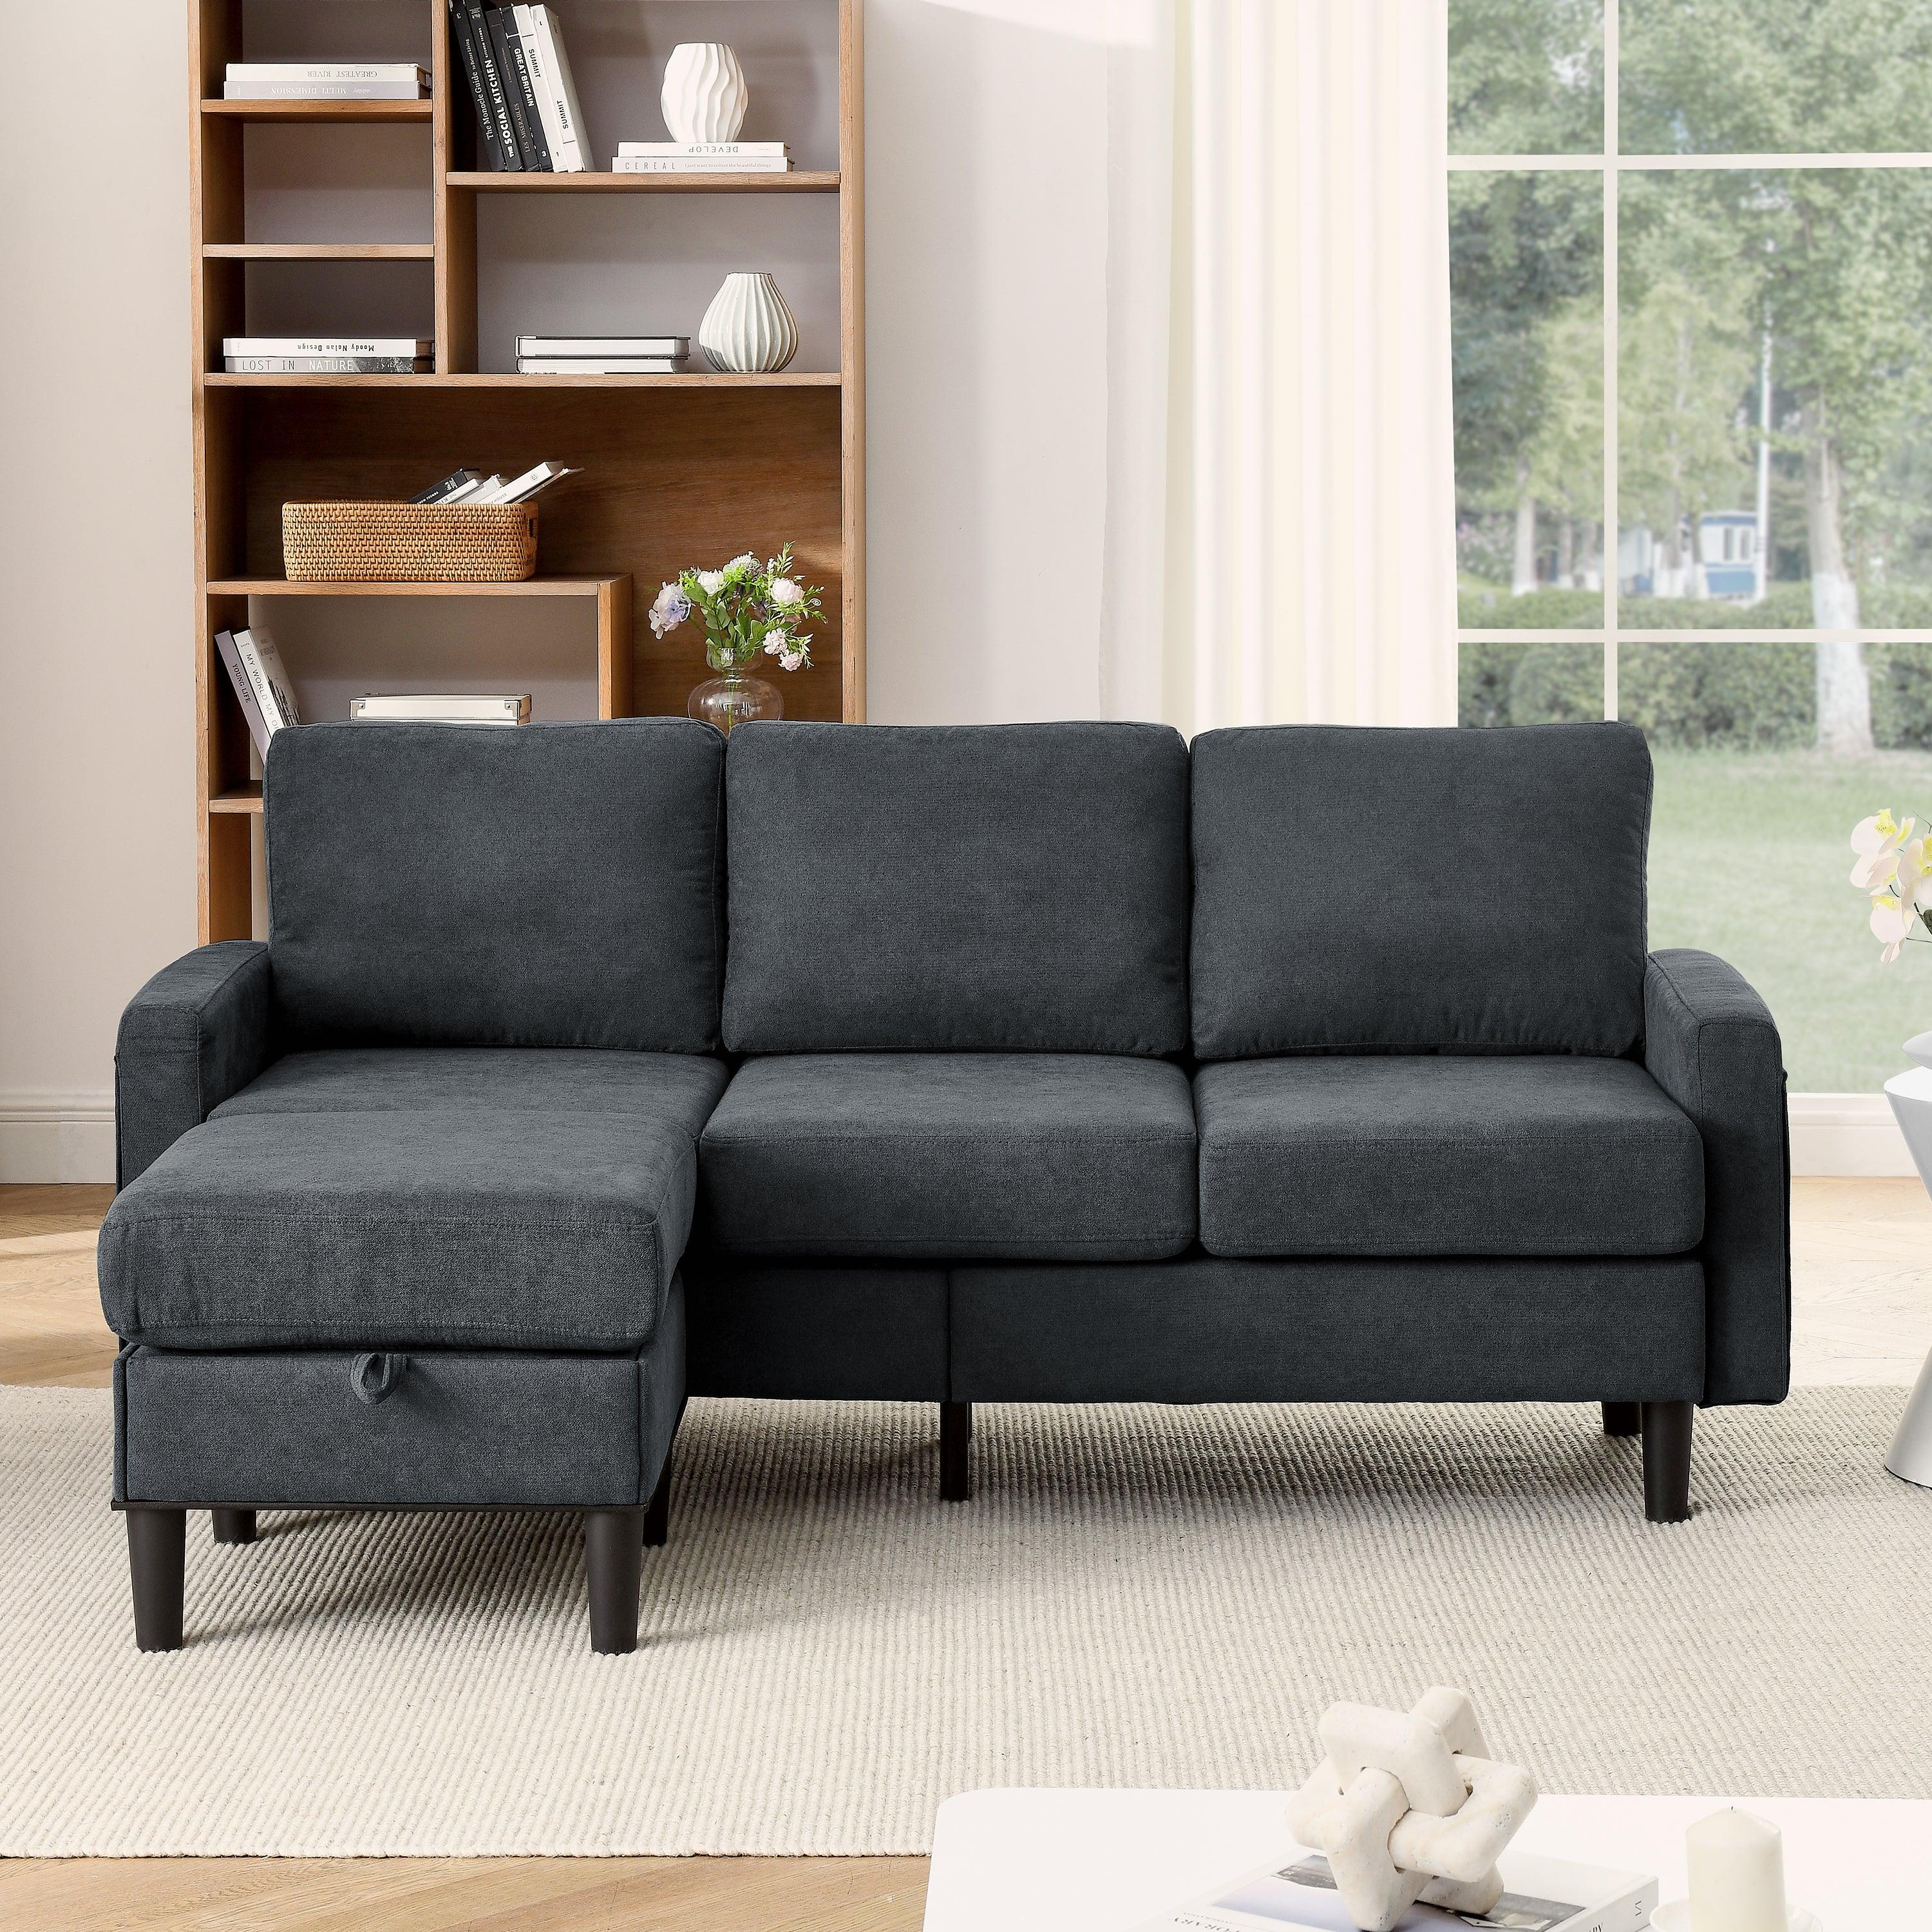 🆓🚛 Upholstered Sectional Sofa Couch, L Shaped Couch With Storage Reversible Ottoman Bench 3 Seater for Living Room, Apartment, Compact Spaces, Fabric Dark Gray